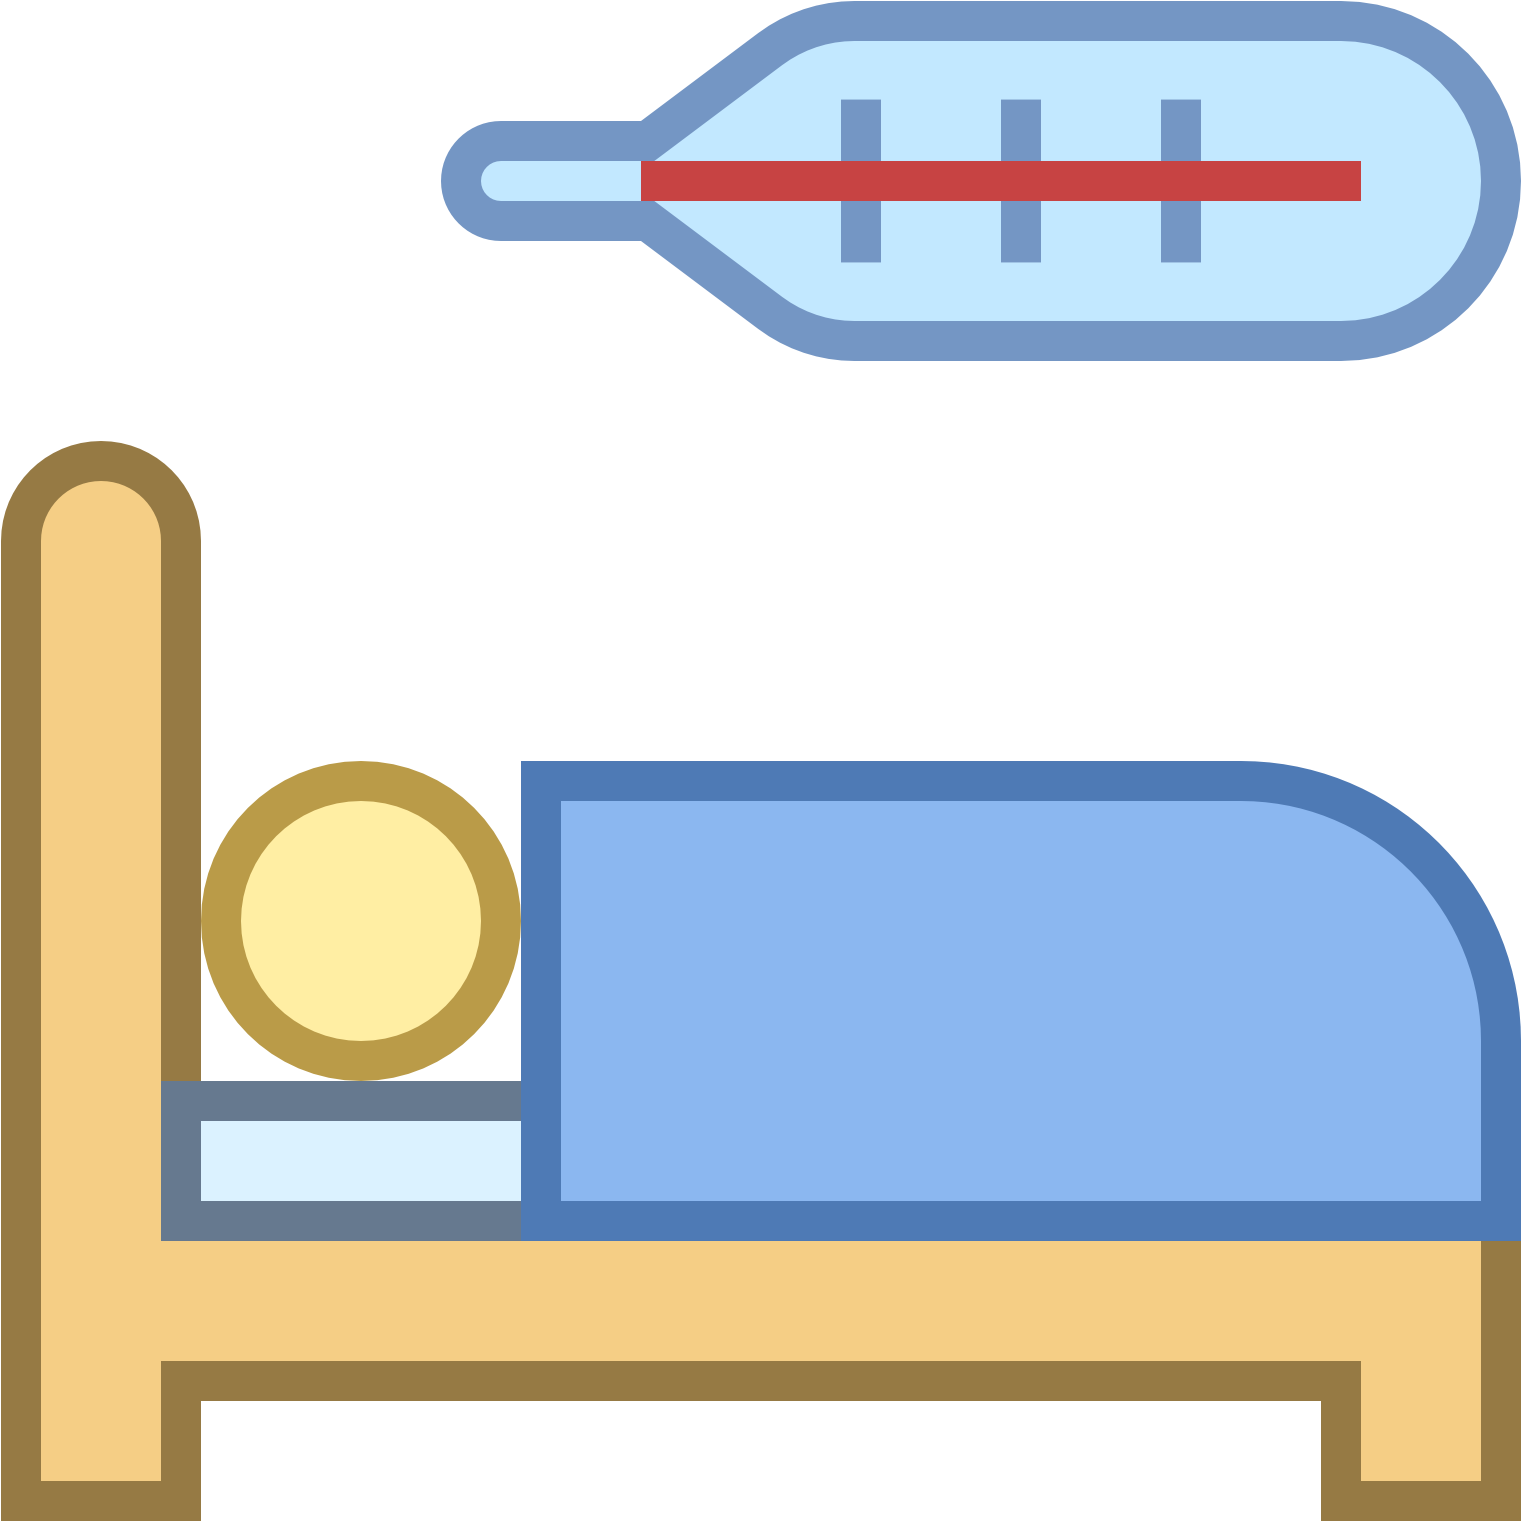 Being Sick Icon - Sick Flat Icon Png (1600x1600)